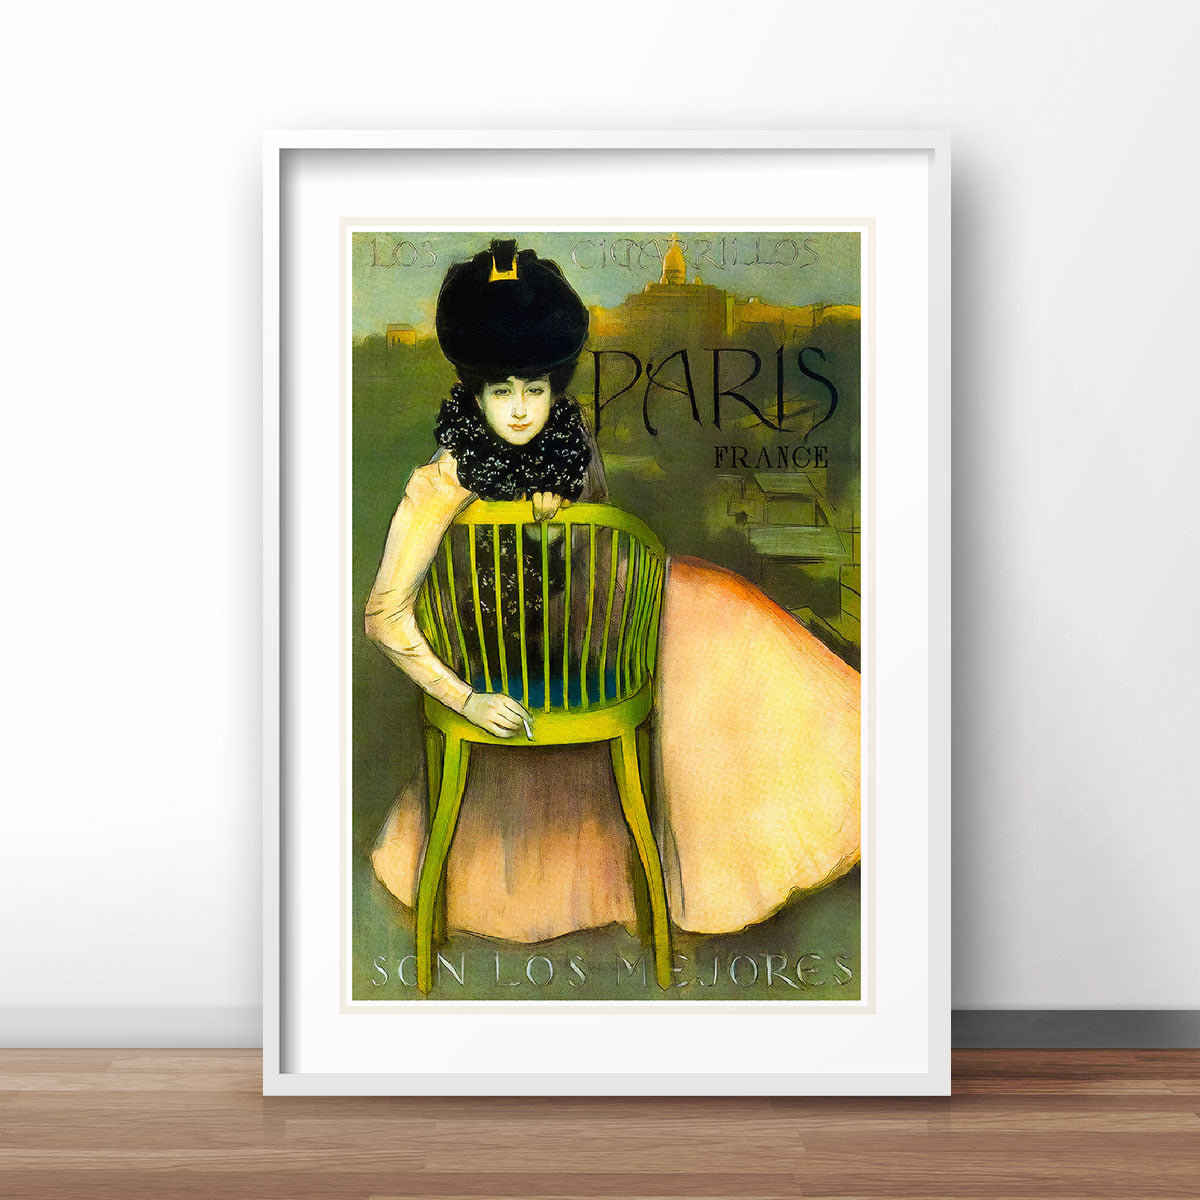 Paris France travel advertising retro poster print from Places We Luv